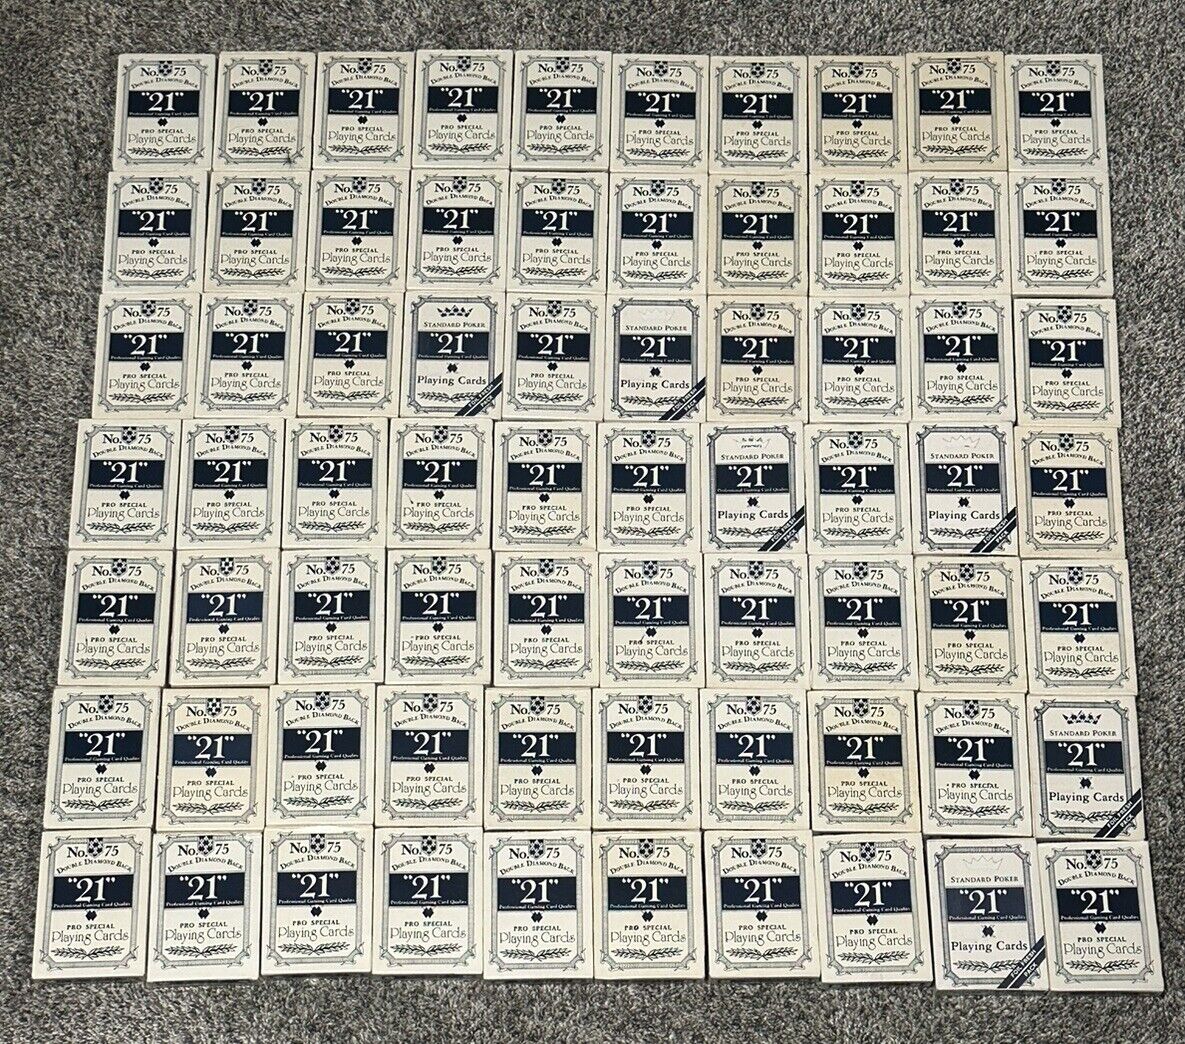 *Lot of 70 Vintage ‘21’ Arrco Poker Playing Cards - Great Condition*